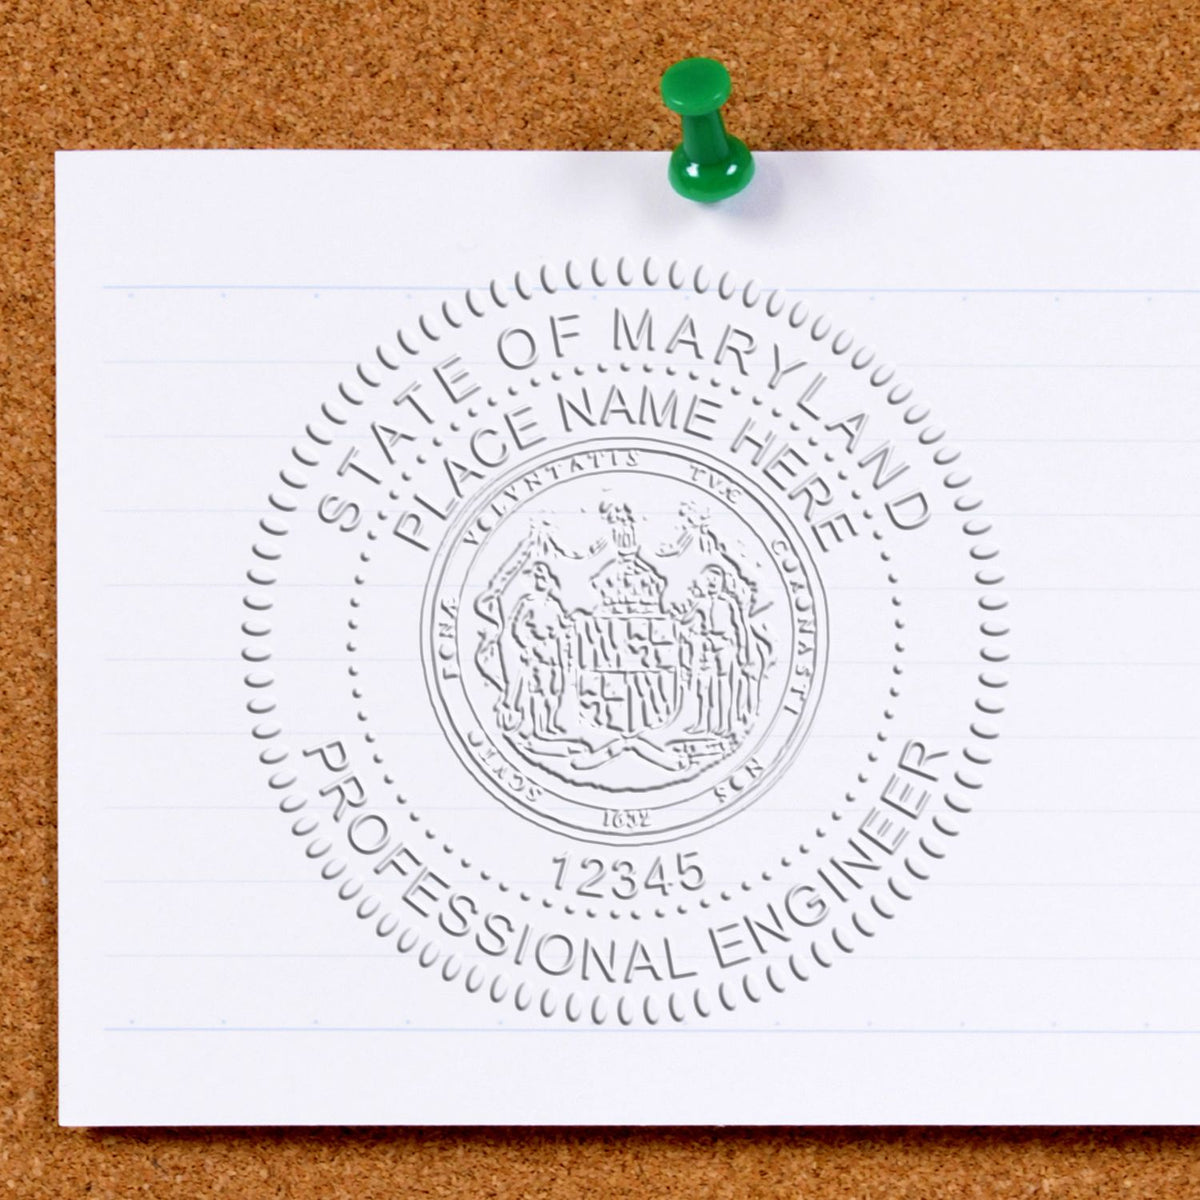 This paper is stamped with a sample imprint of the Maryland Engineer Desk Seal, signifying its quality and reliability.